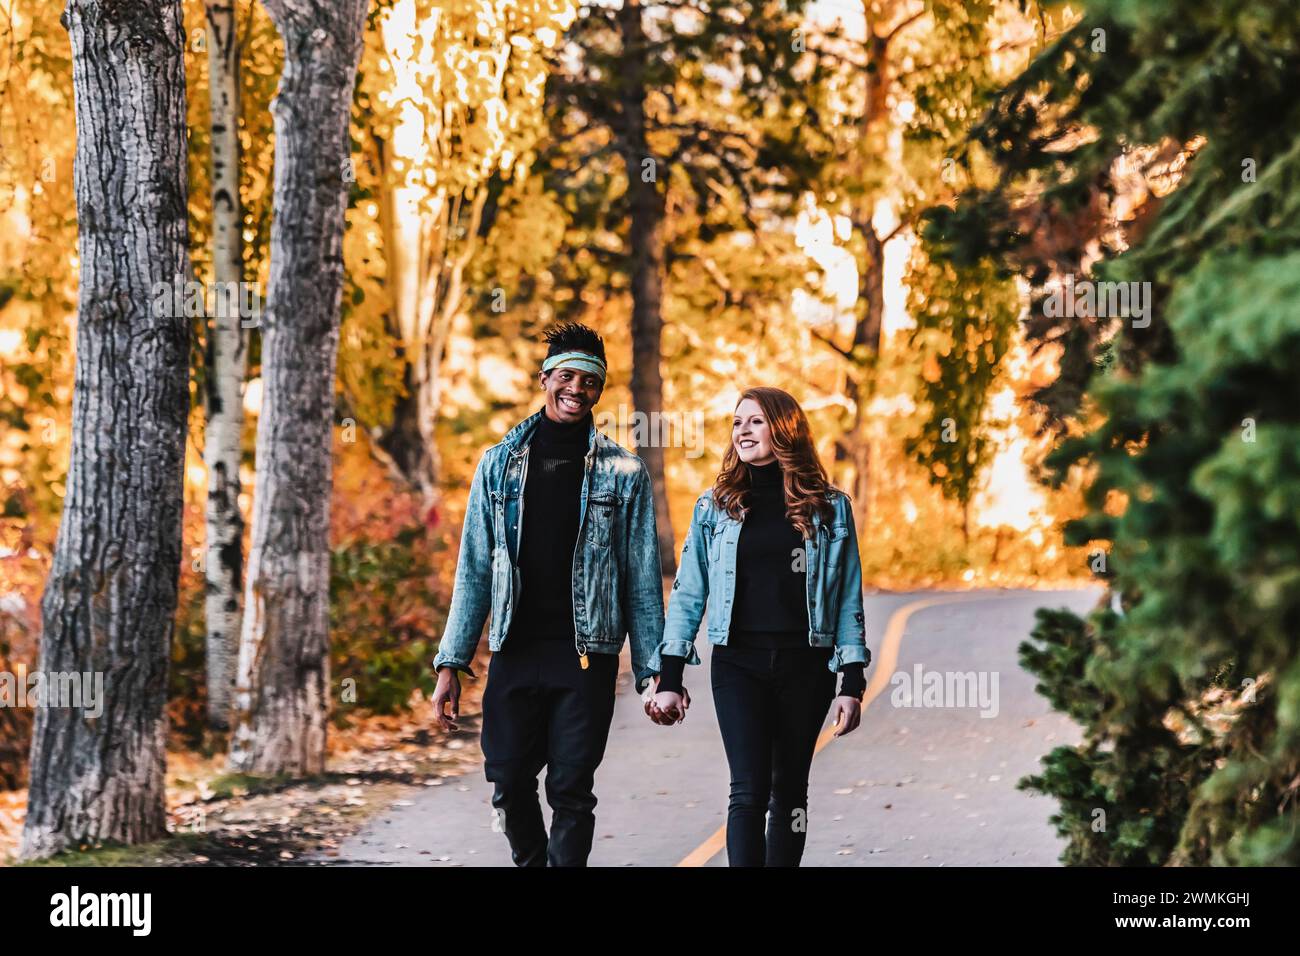 A mixed race married couple walking down a road in a city park during a fall family outing, holding hands, spending quality time together Stock Photo